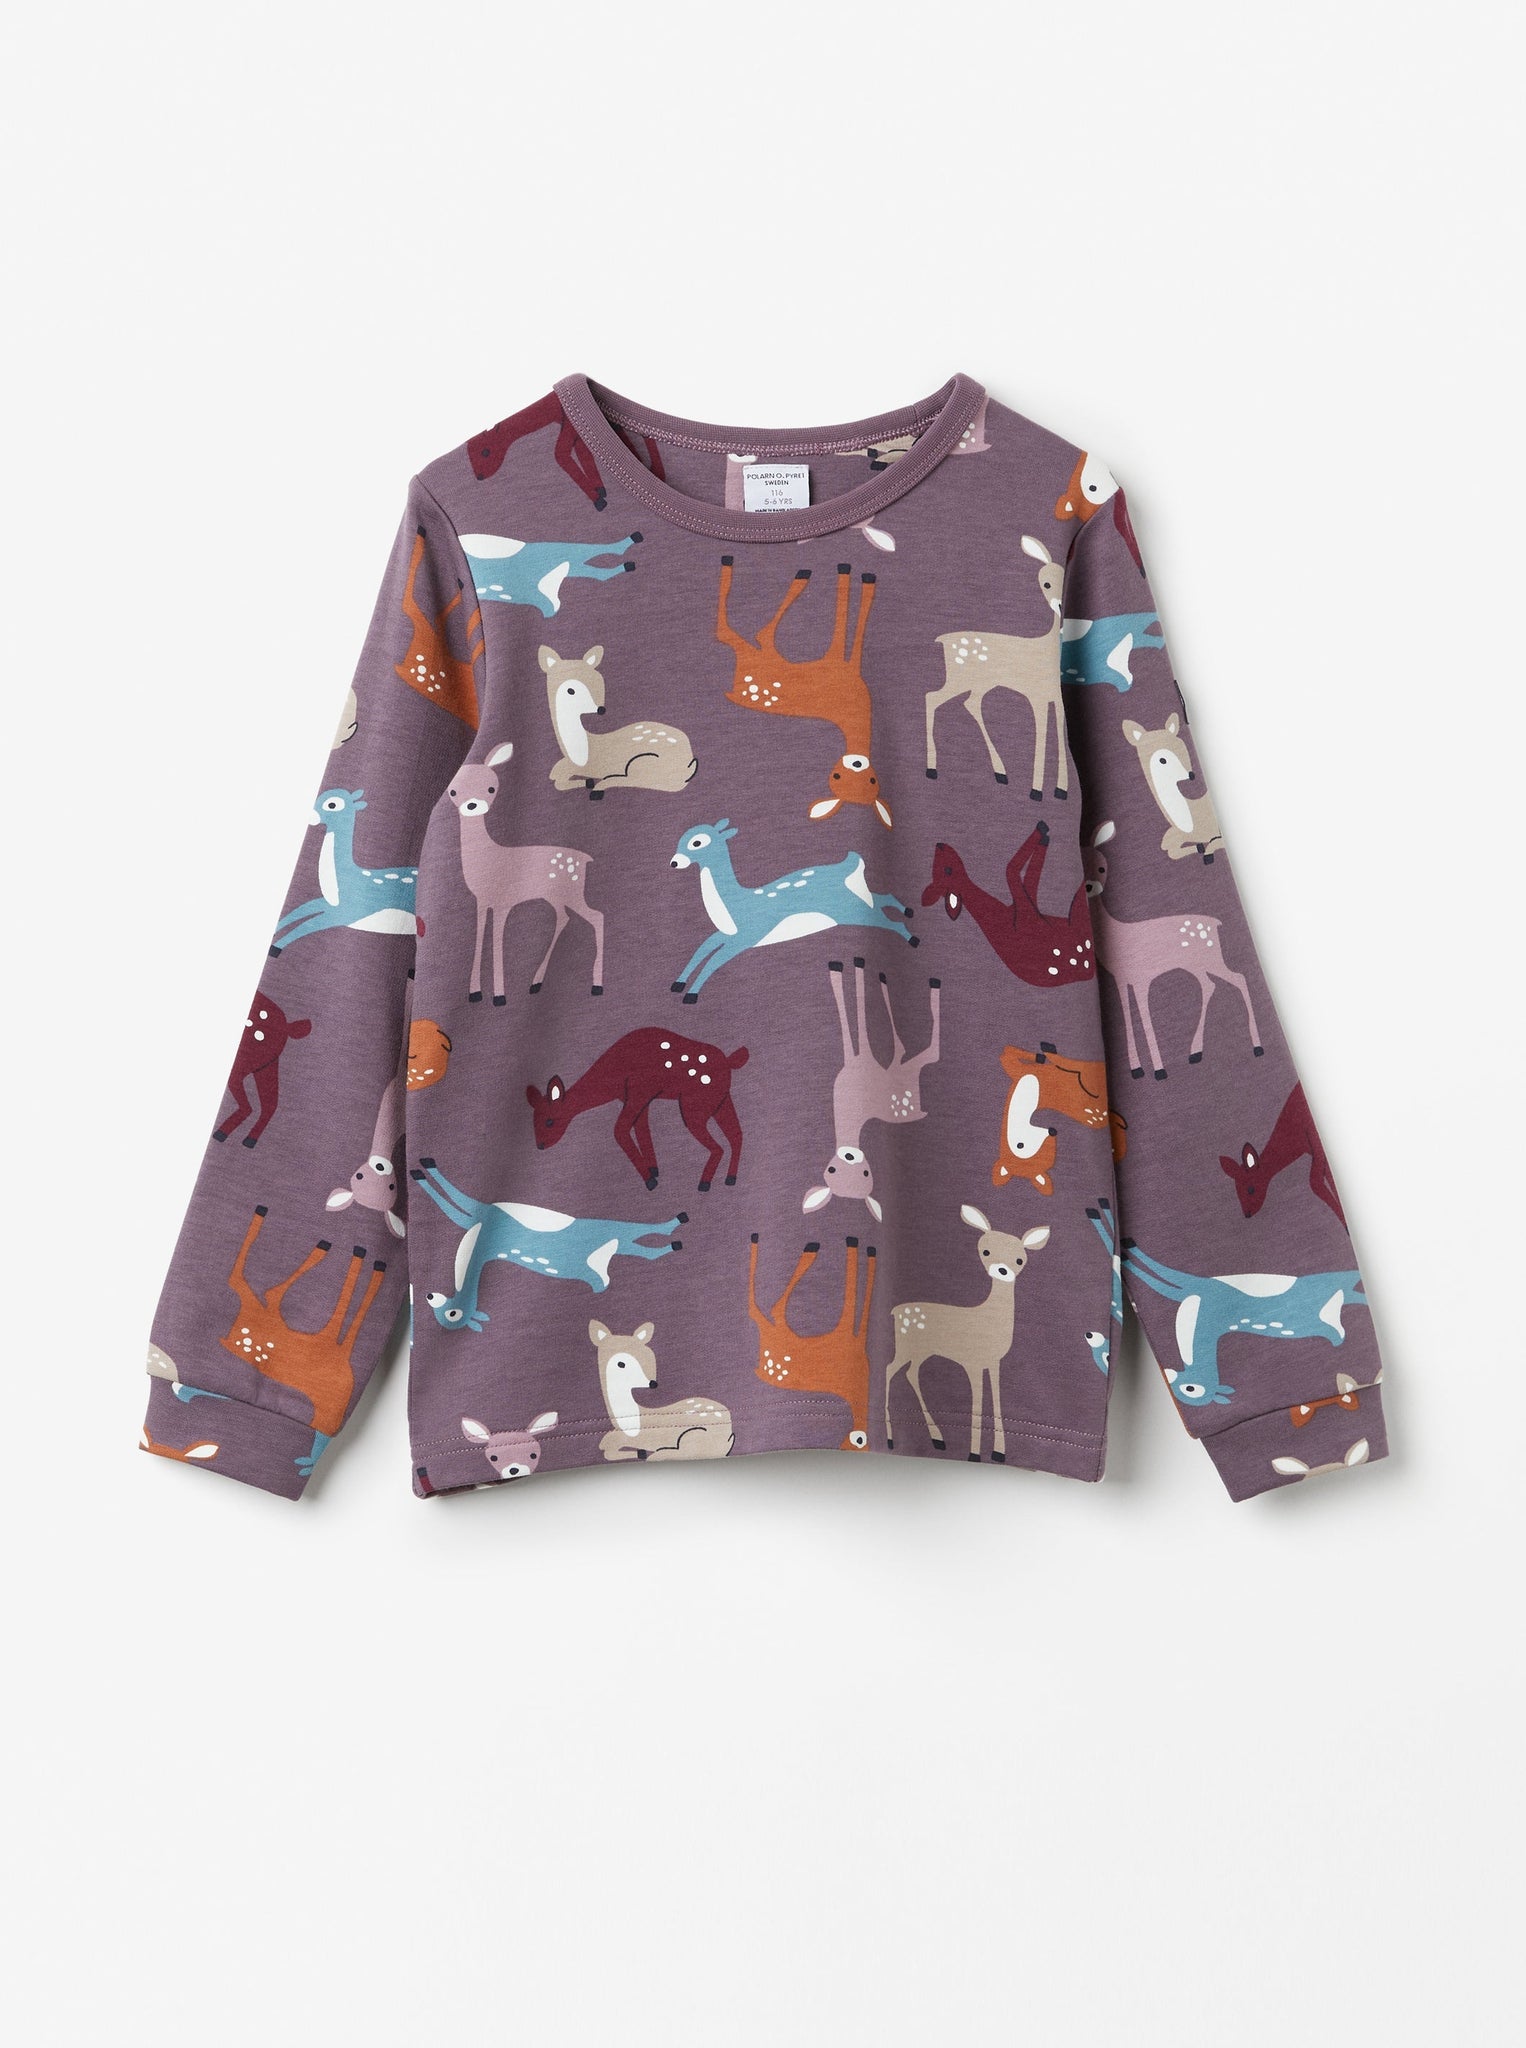 Organic Cotton Nordic Purple Kids Top from the Polarn O. Pyret kidswear collection. Clothes made using sustainably sourced materials.